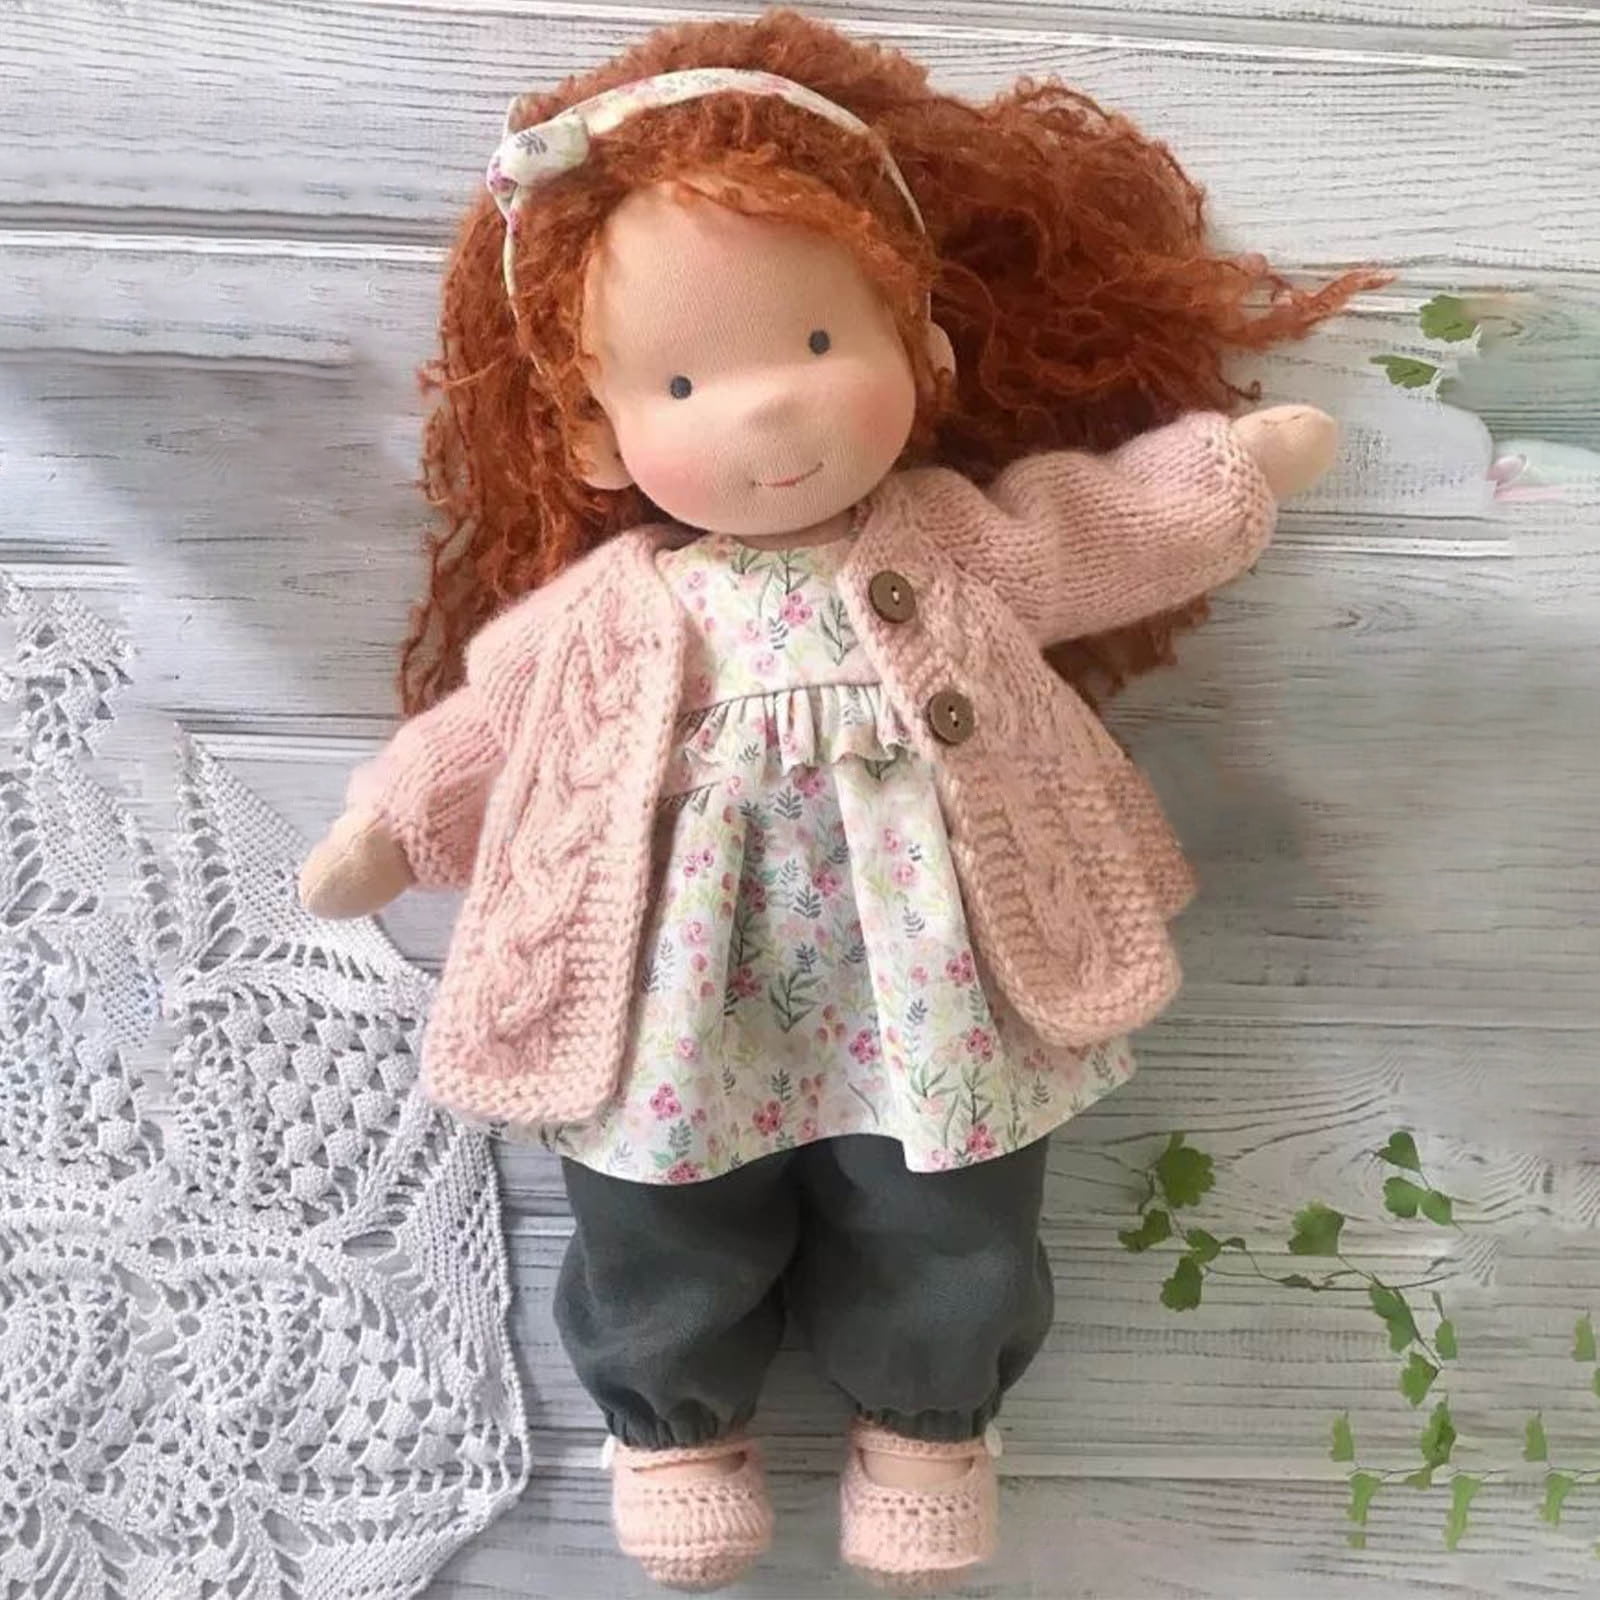 Herrnalise Waldorf Doll,Handmade Waldorf Handmade Knitted Dolls Toys,Stuffed  Toy Christmas Birthday Gift of Waldorf Handmade Doll,Ideal First Doll for  Babies & Toddlers 